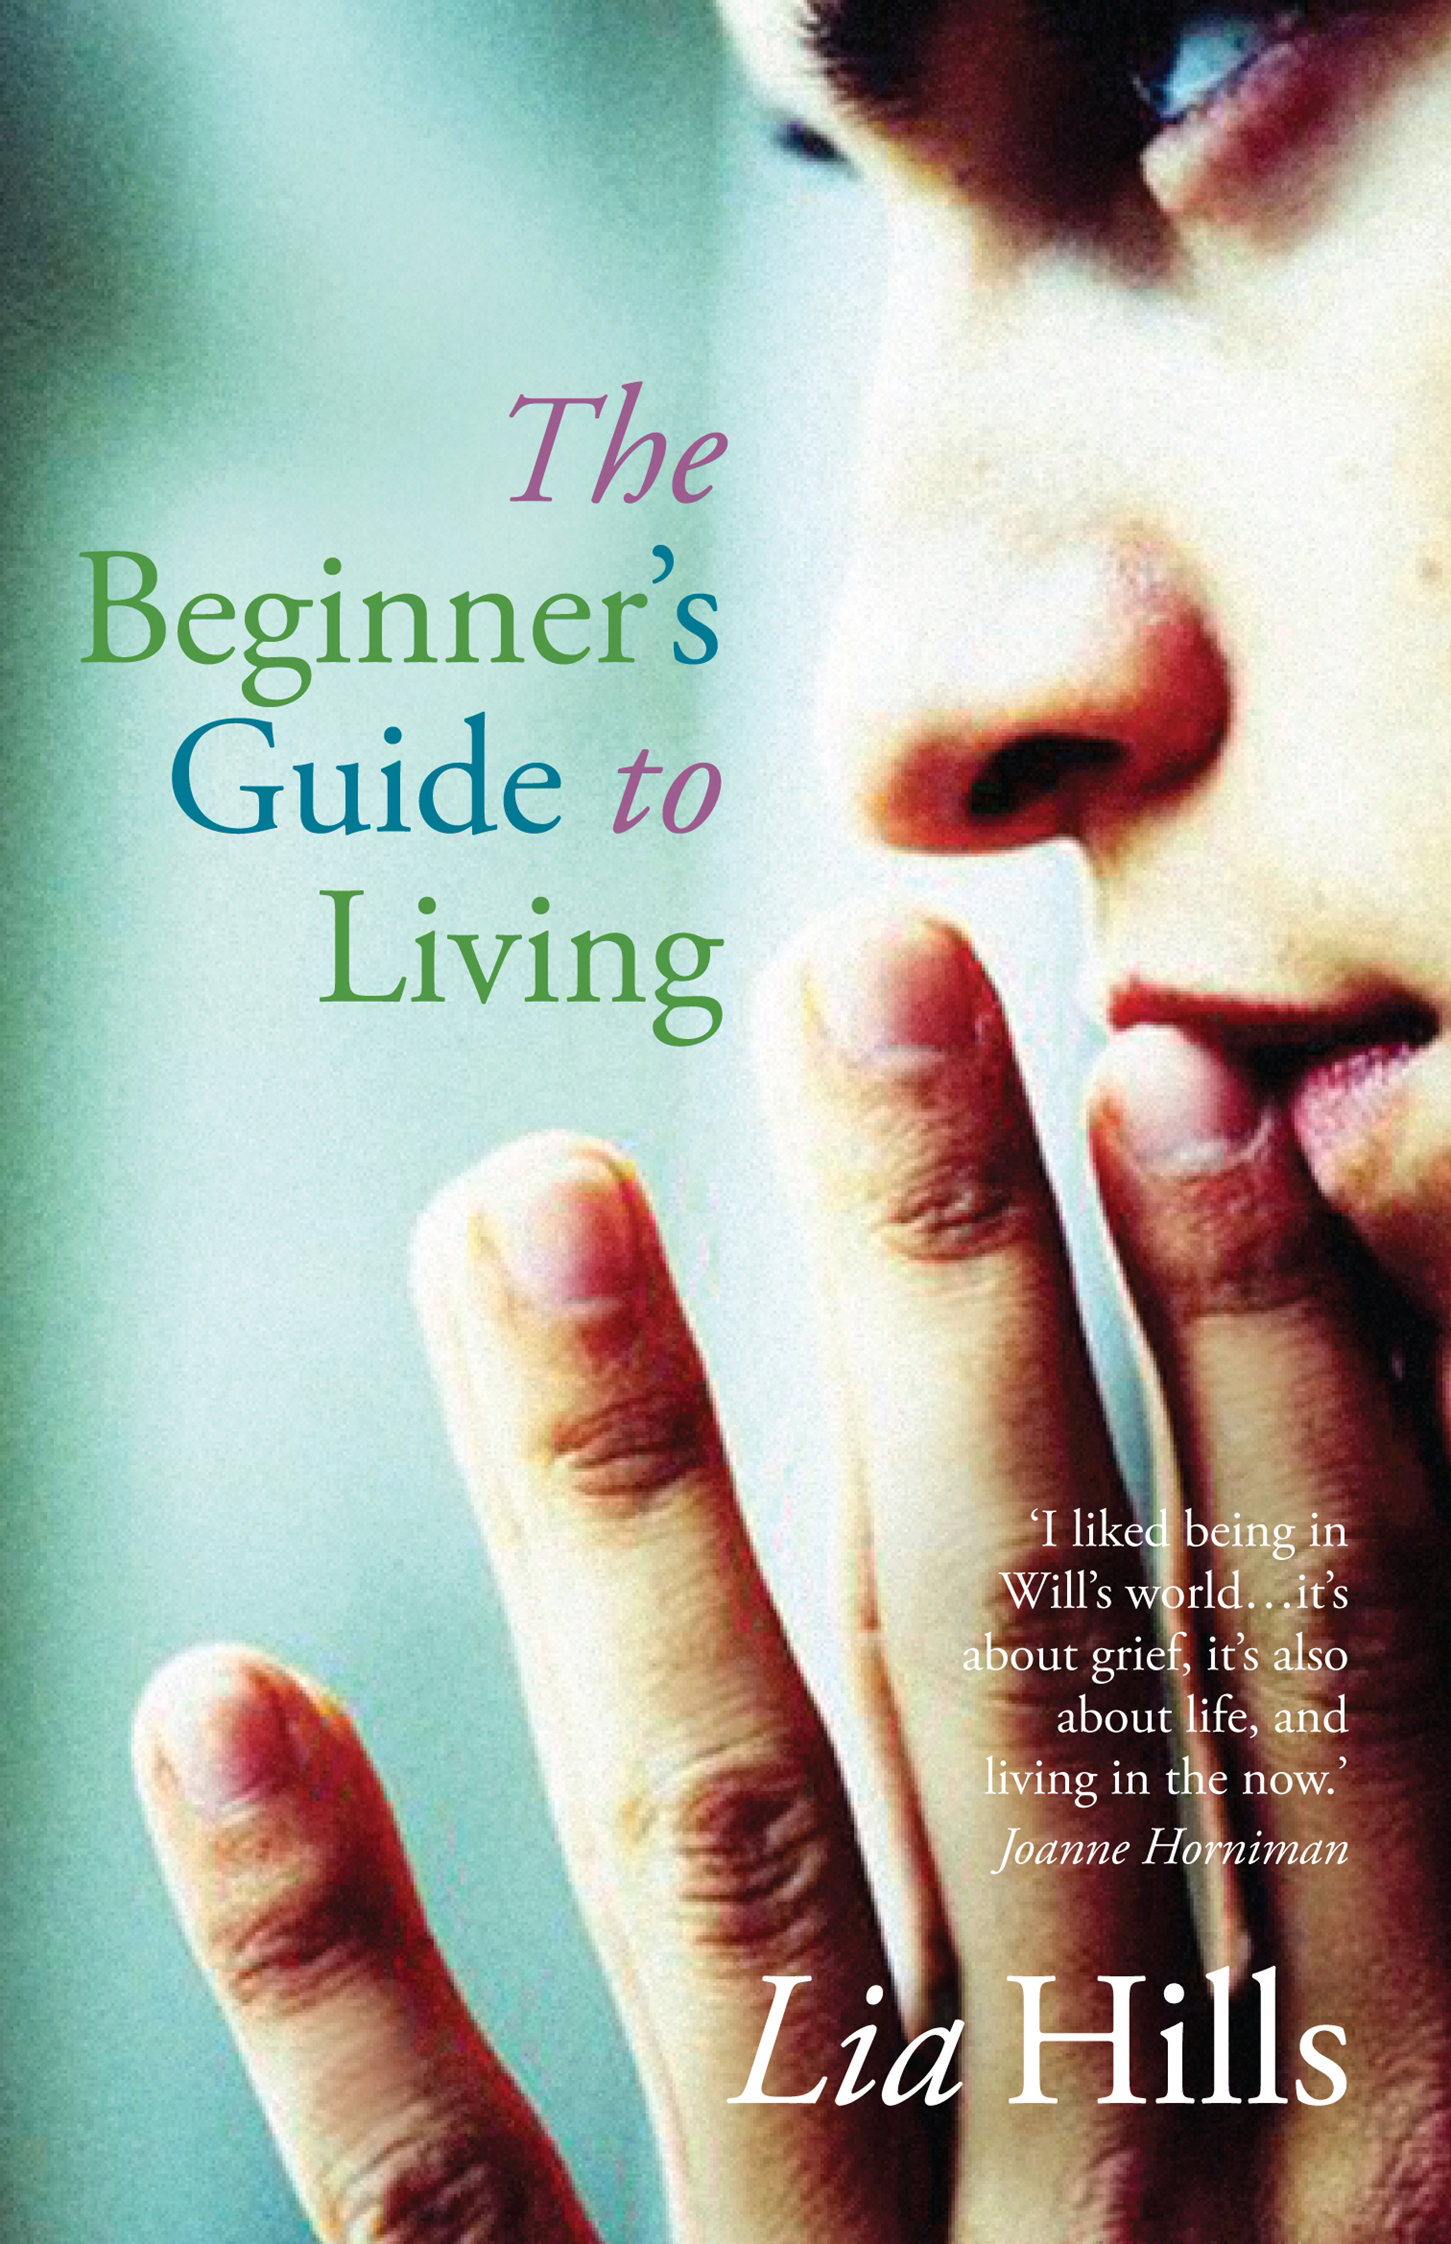 The Beginner’s Guide to Living